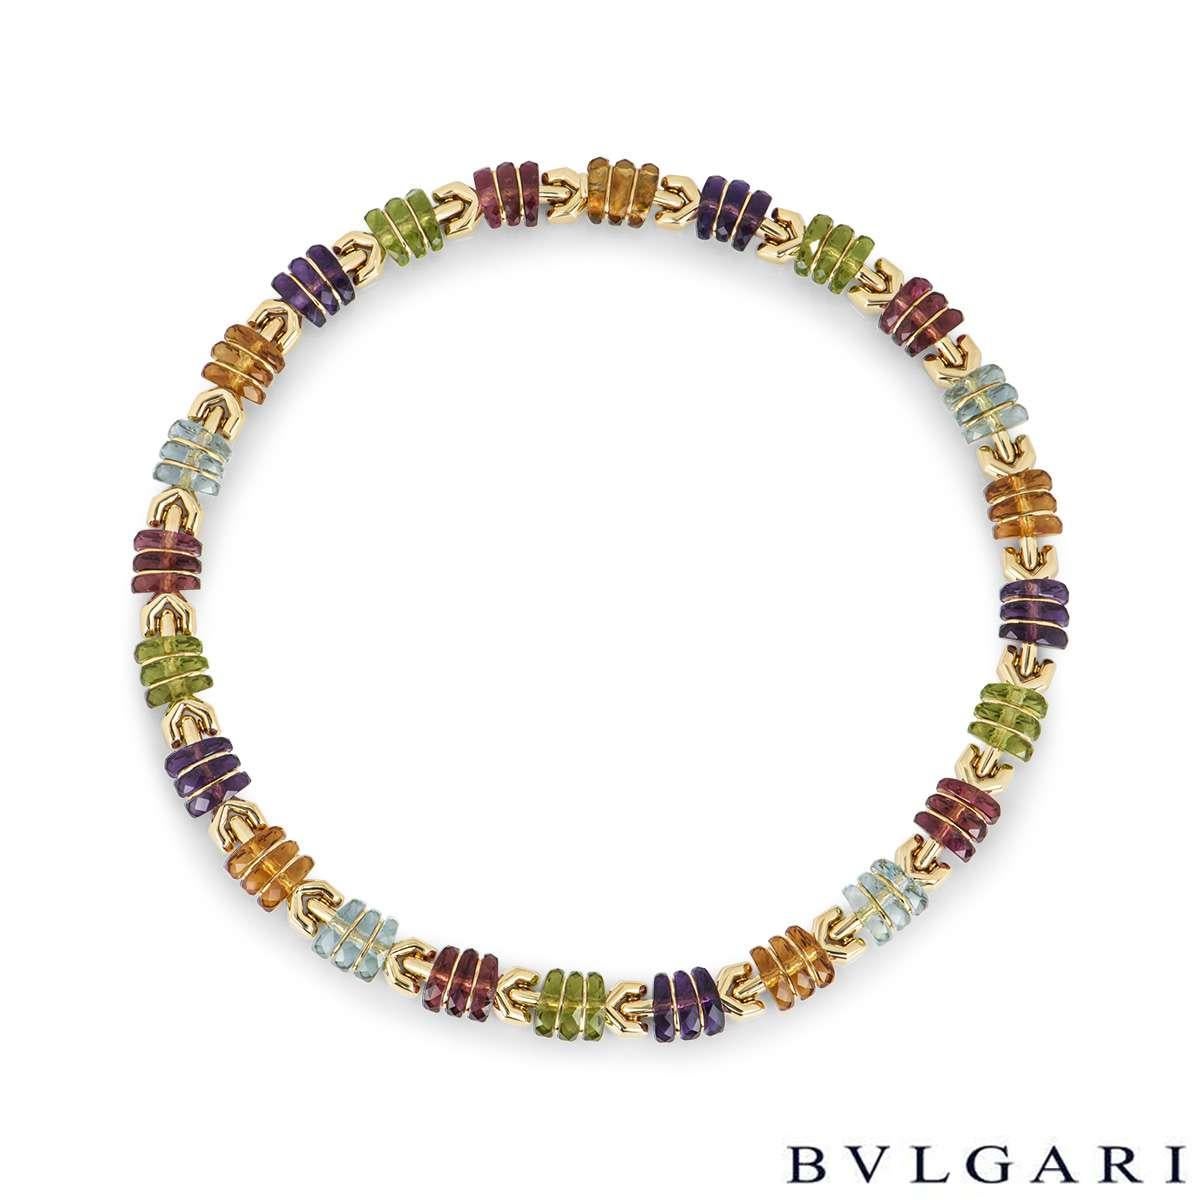 An eye-catching 18k yellow gold multi-gem set collar necklace by Bvlgari. The necklace is made up of 24 alternating gem-set links, featuring amethyst, citrine, aquamarine, tourmaline and peridot. The necklace measures 1cm in width and is 15.7 inches